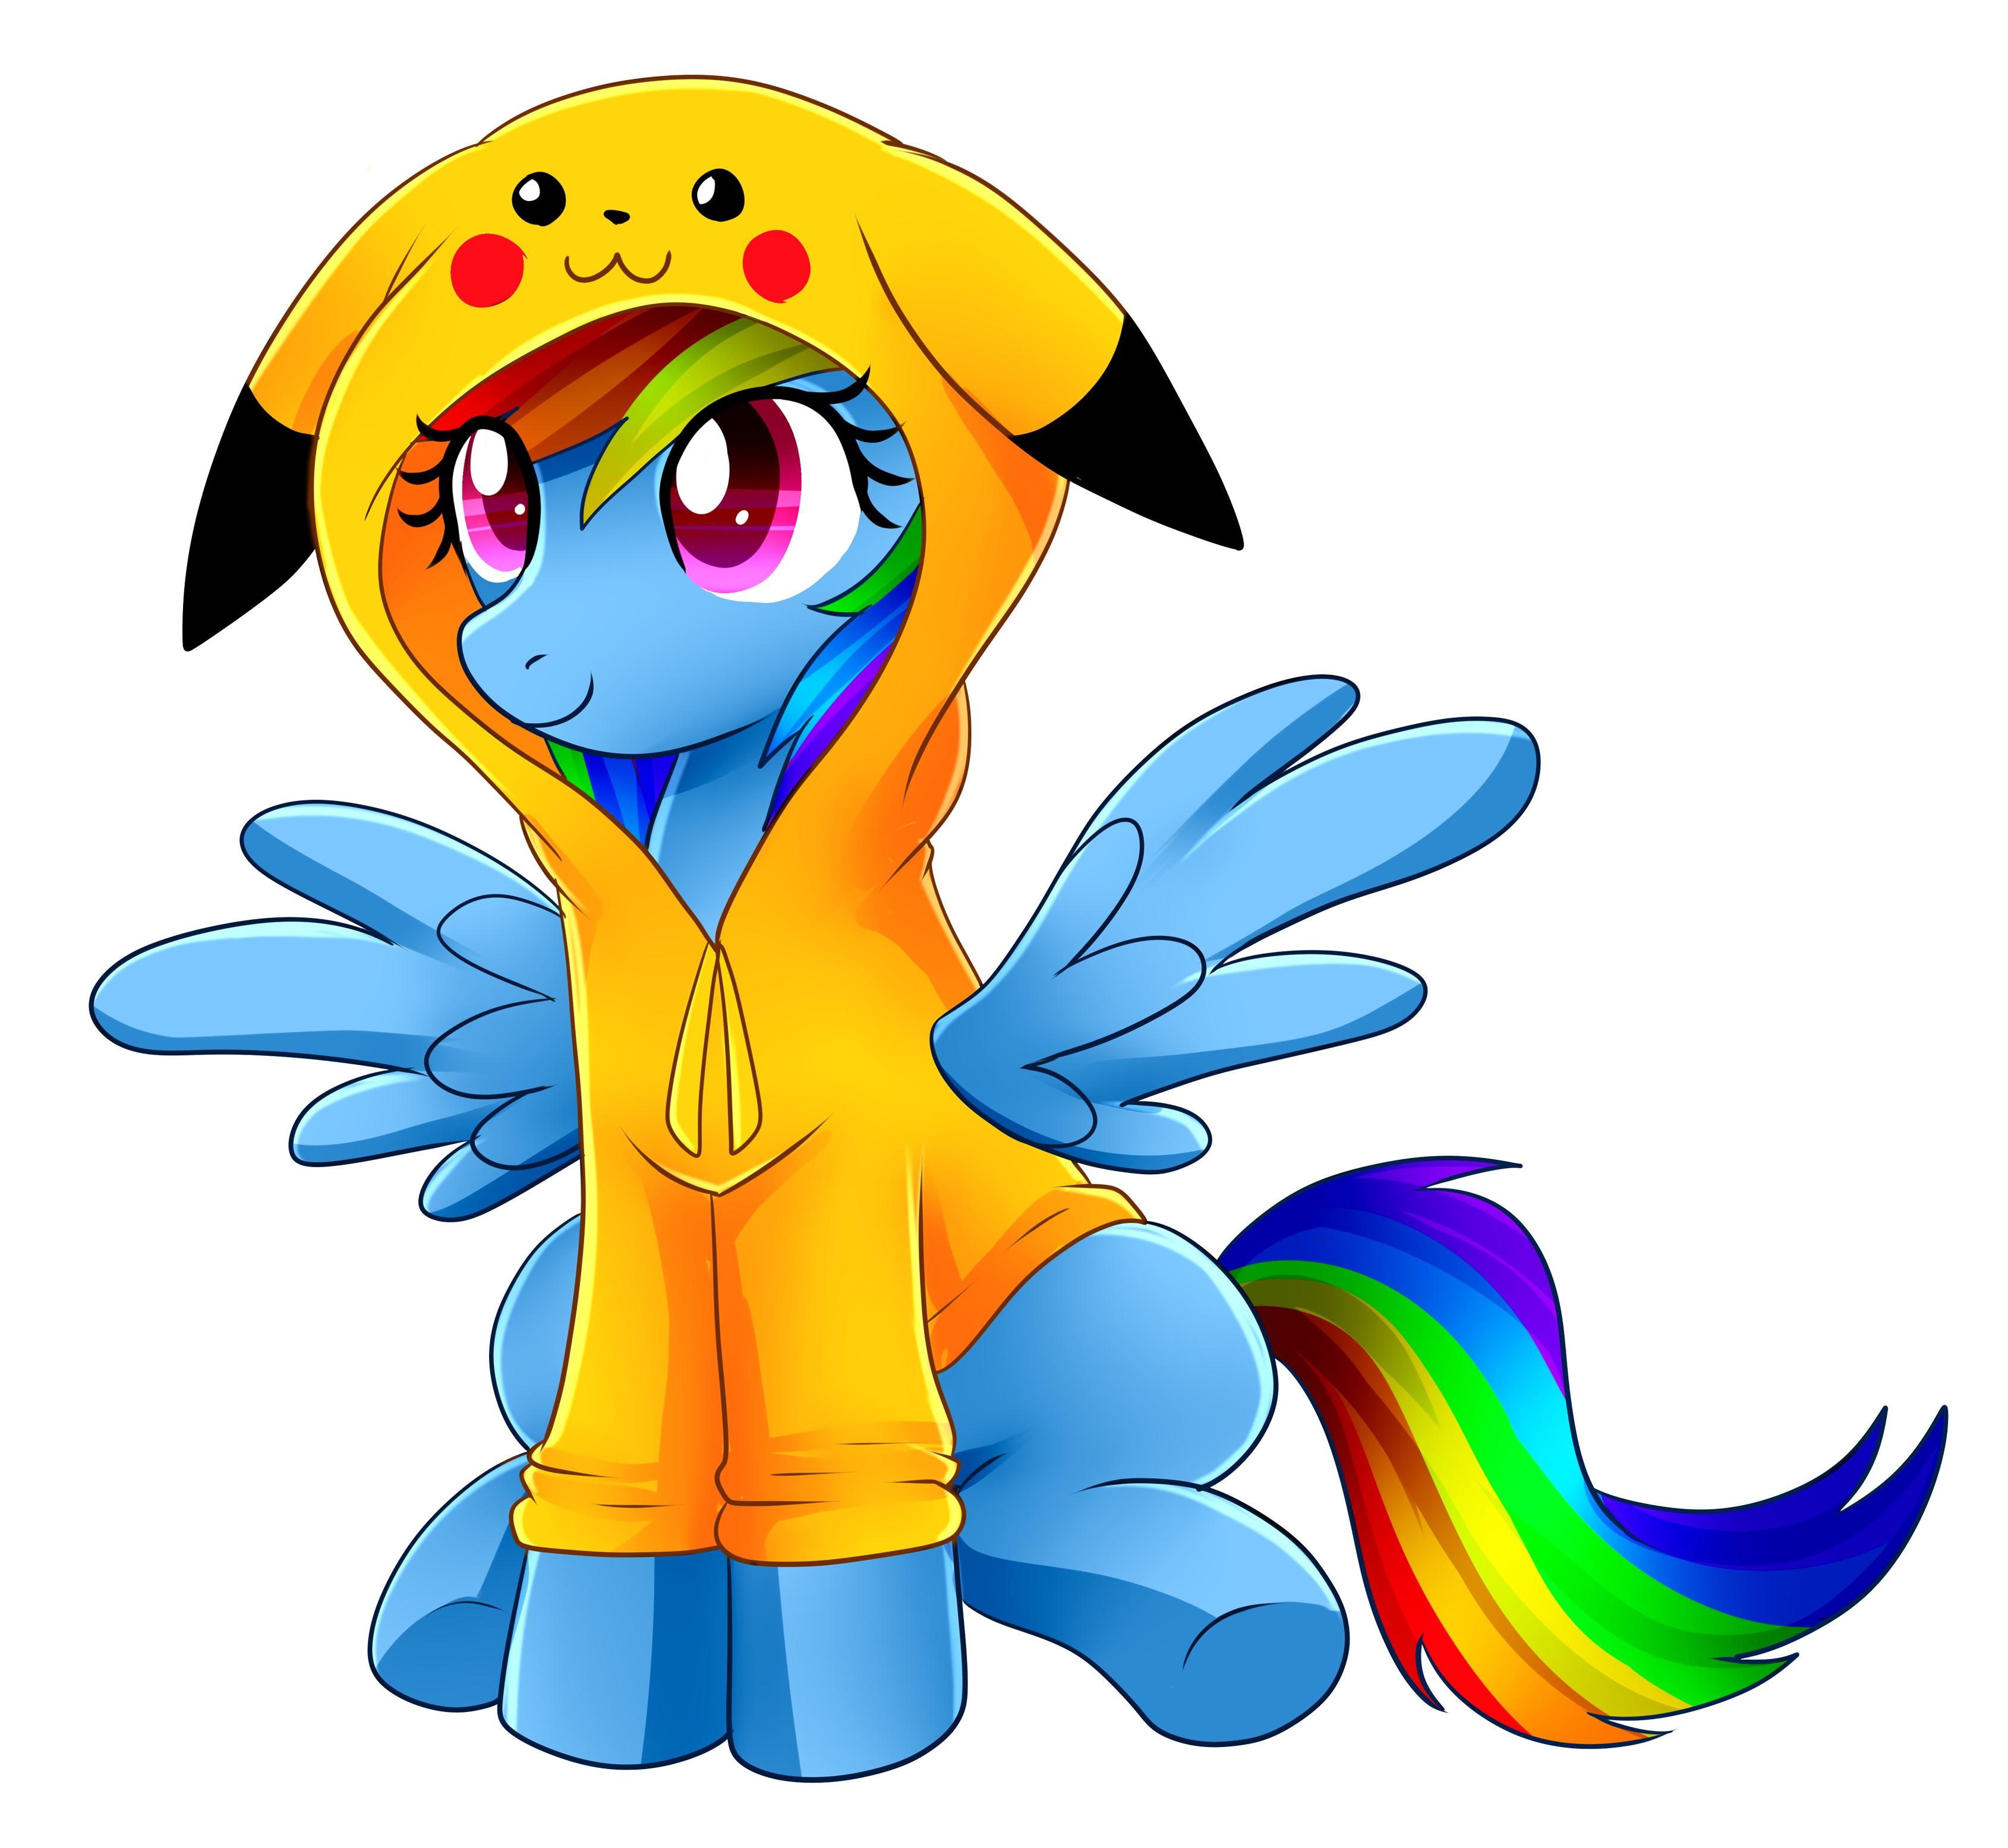 849701__safe_solo_rainbow dash_clothes_smiling_cute_sitting_spread wings_pokémon_hoodie.jpg